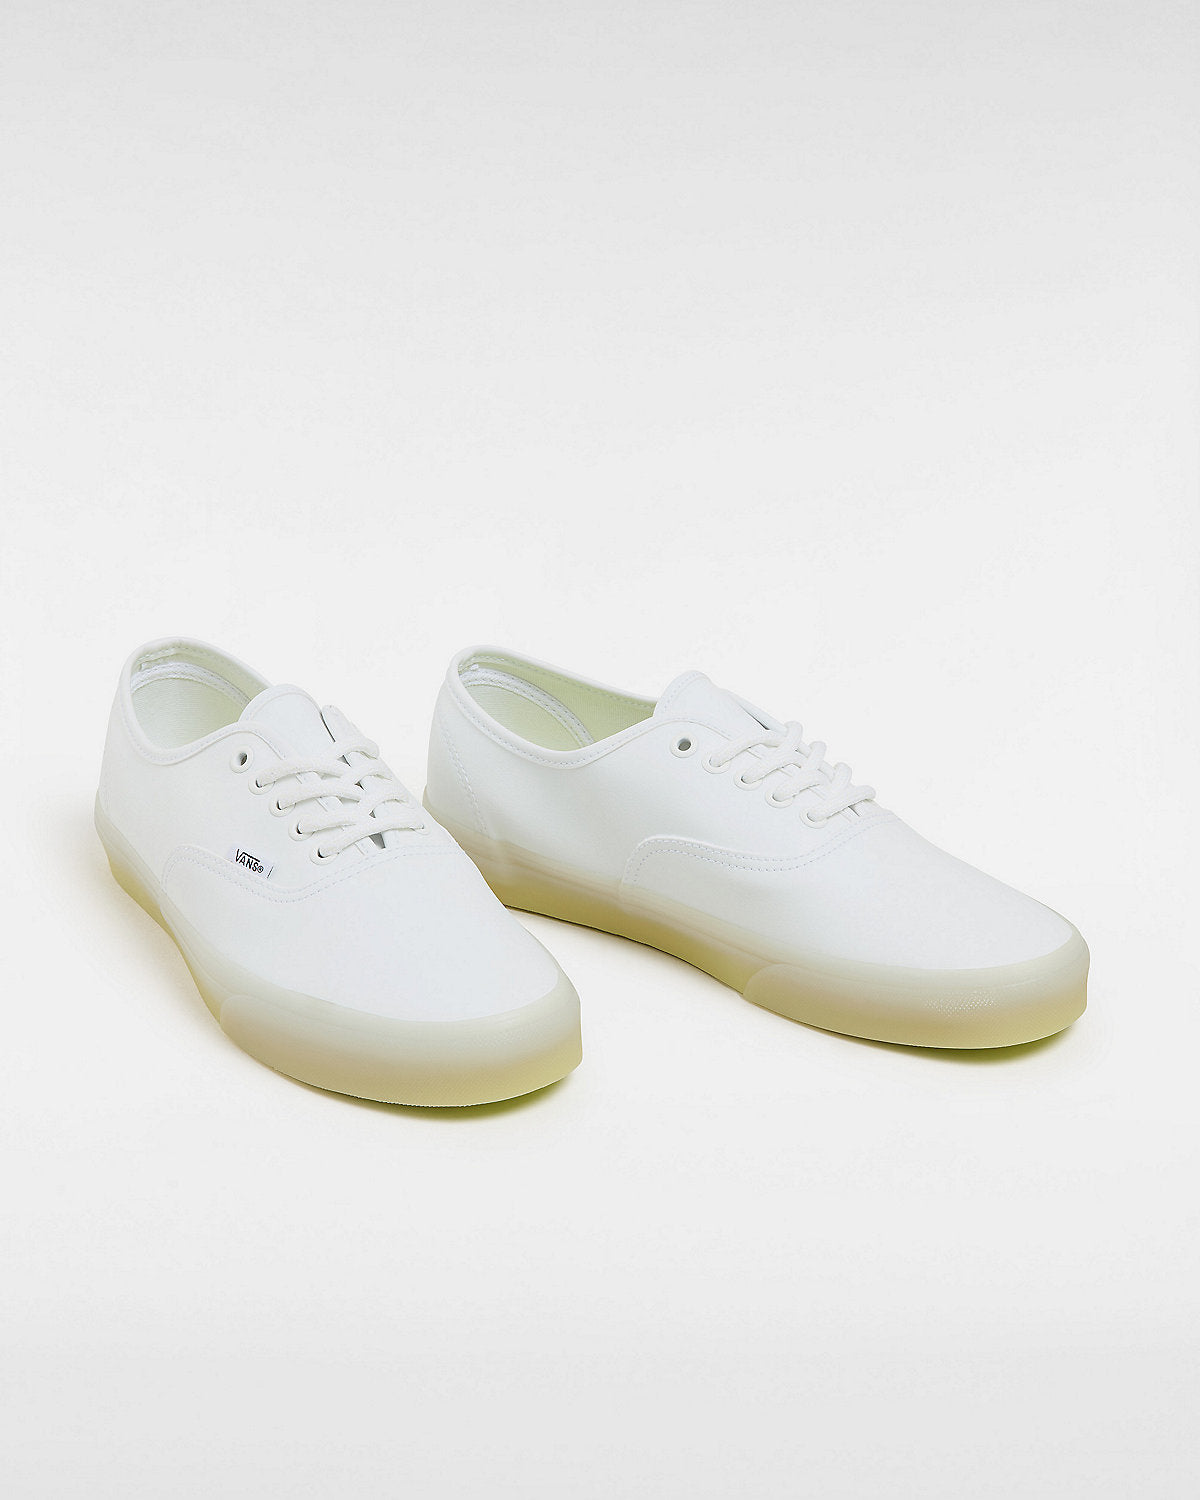 VANS Unisex Authentic Glow to the Flo Trainers - White